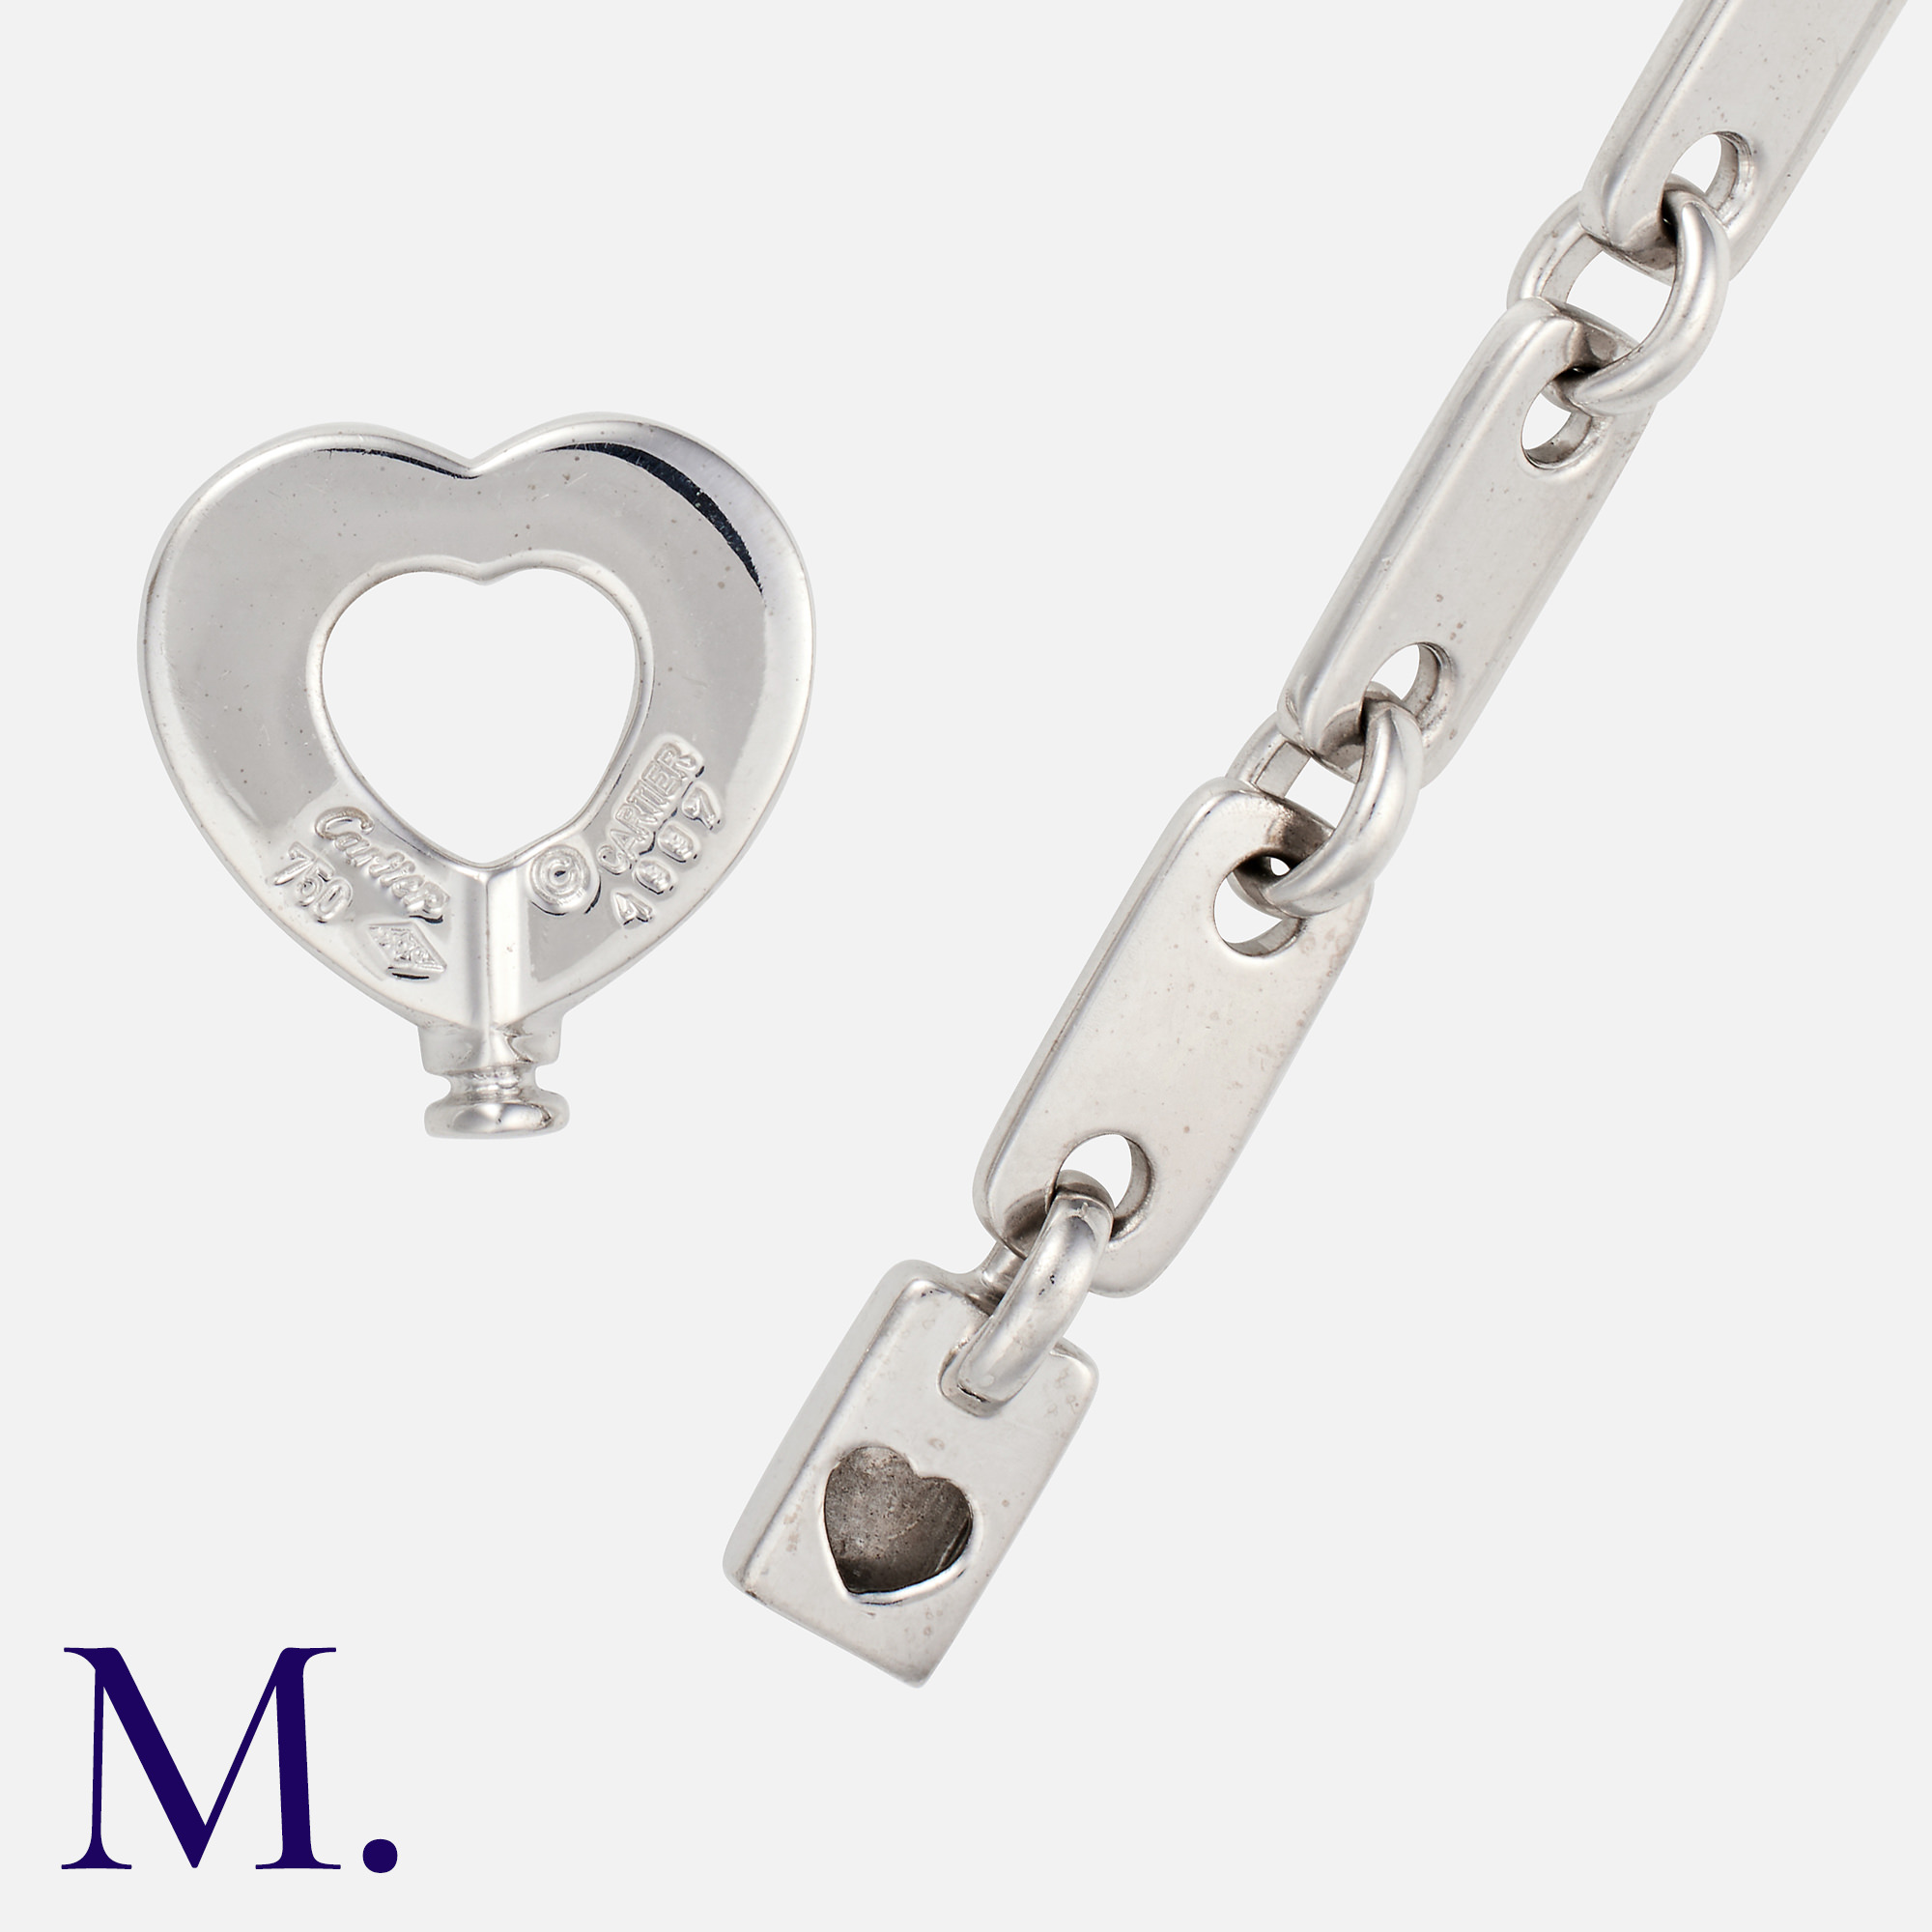 CARTIER. A Fidelity Lock and Key Bracelet in 18K white gold, with 15 links and a locking click- - Image 2 of 2